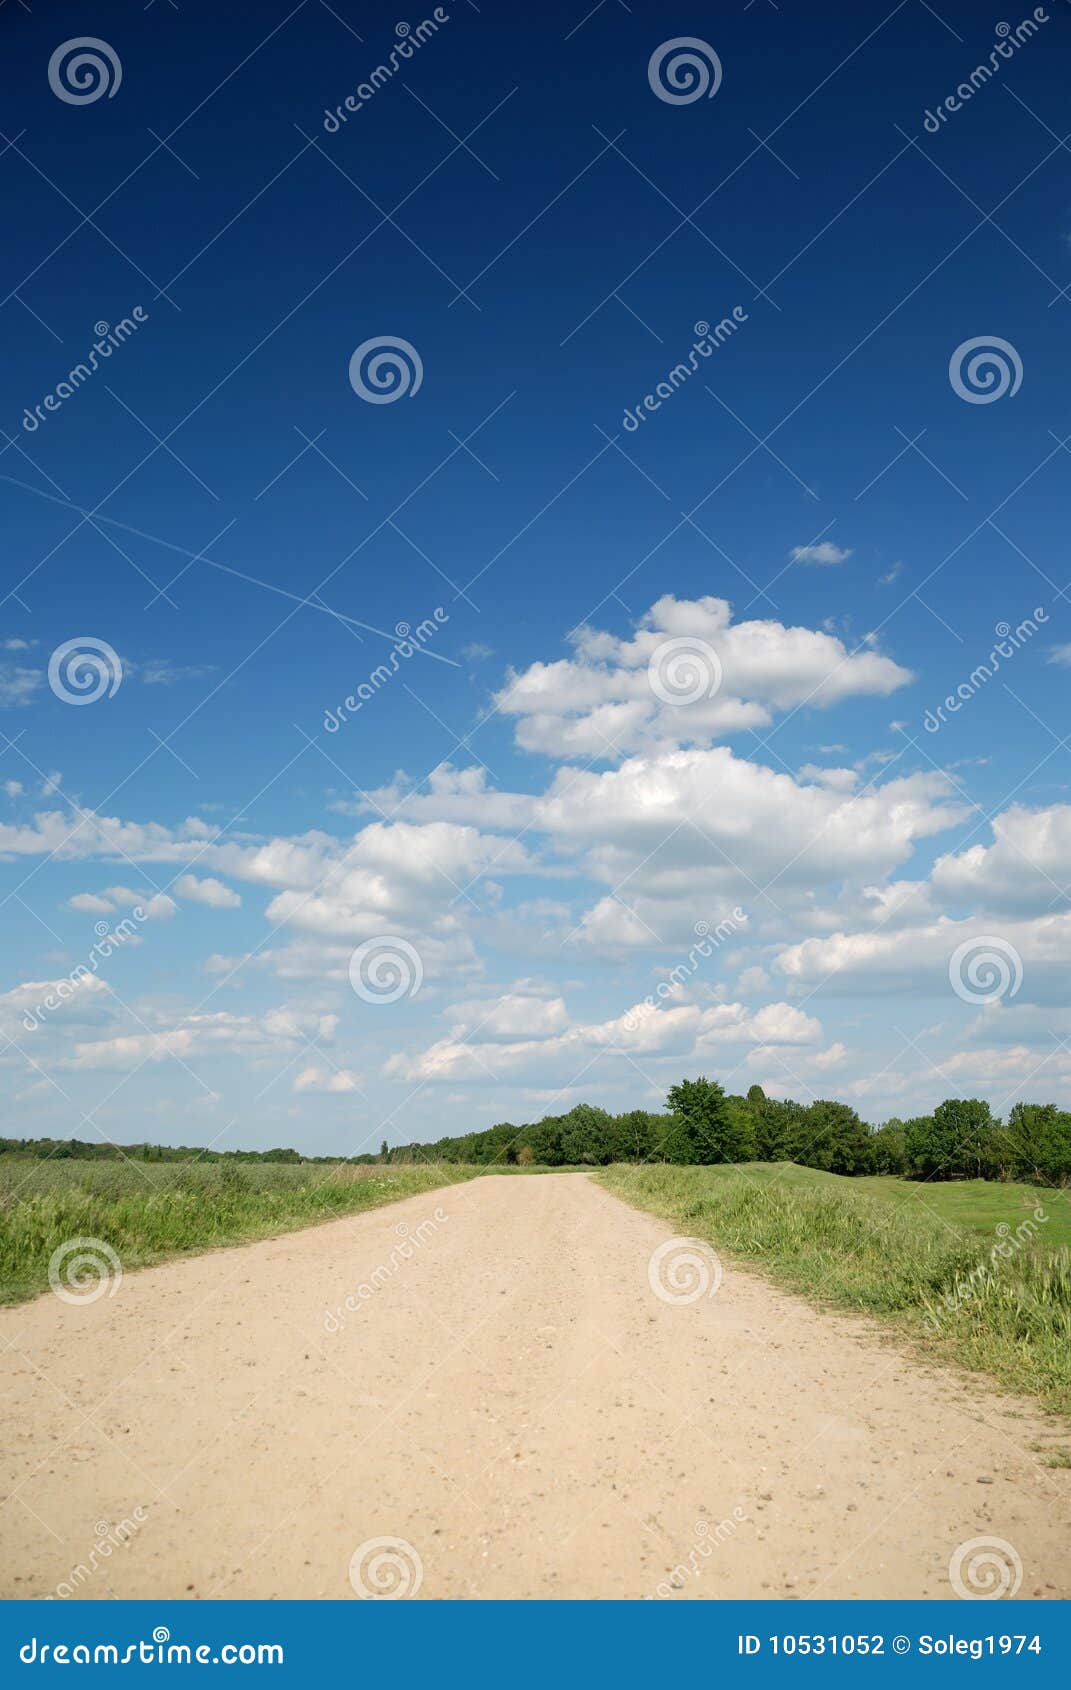 Midday Summer Landscape with Road Stock Photo - Image of airplane